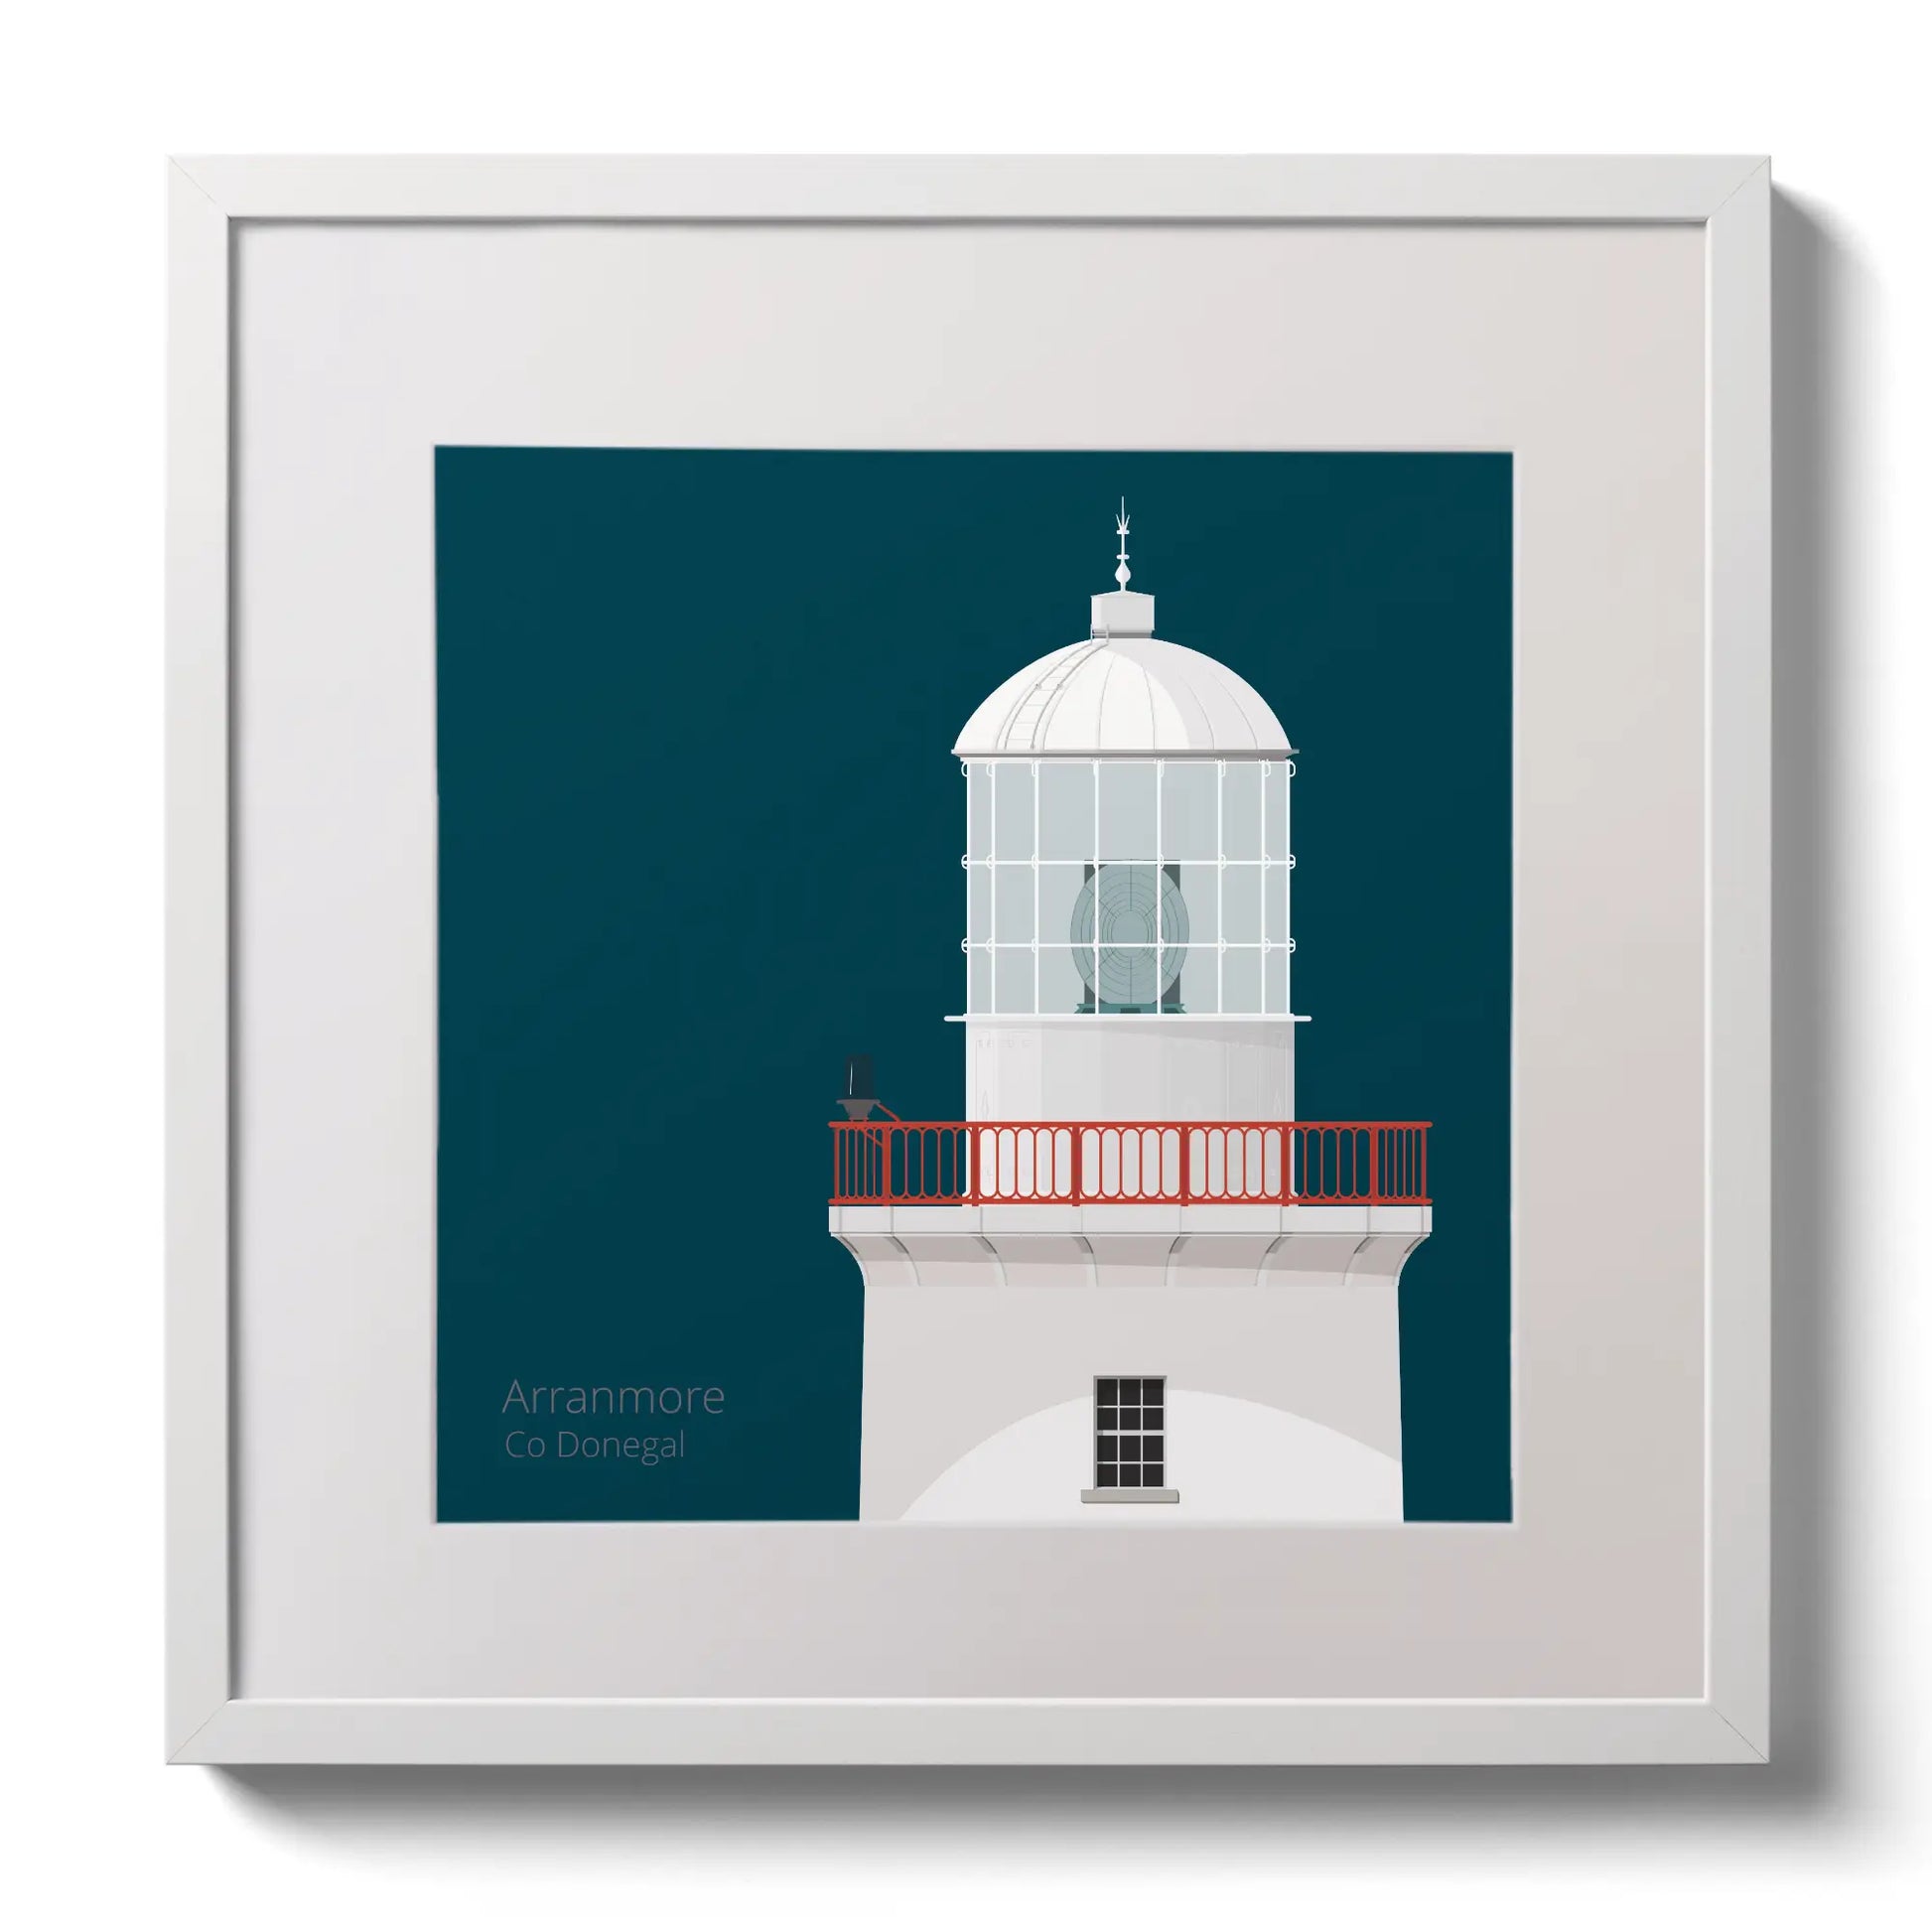 Illustration of Arranmore lighthouse on a midnight blue background,  in a white square frame measuring 30x30cm.